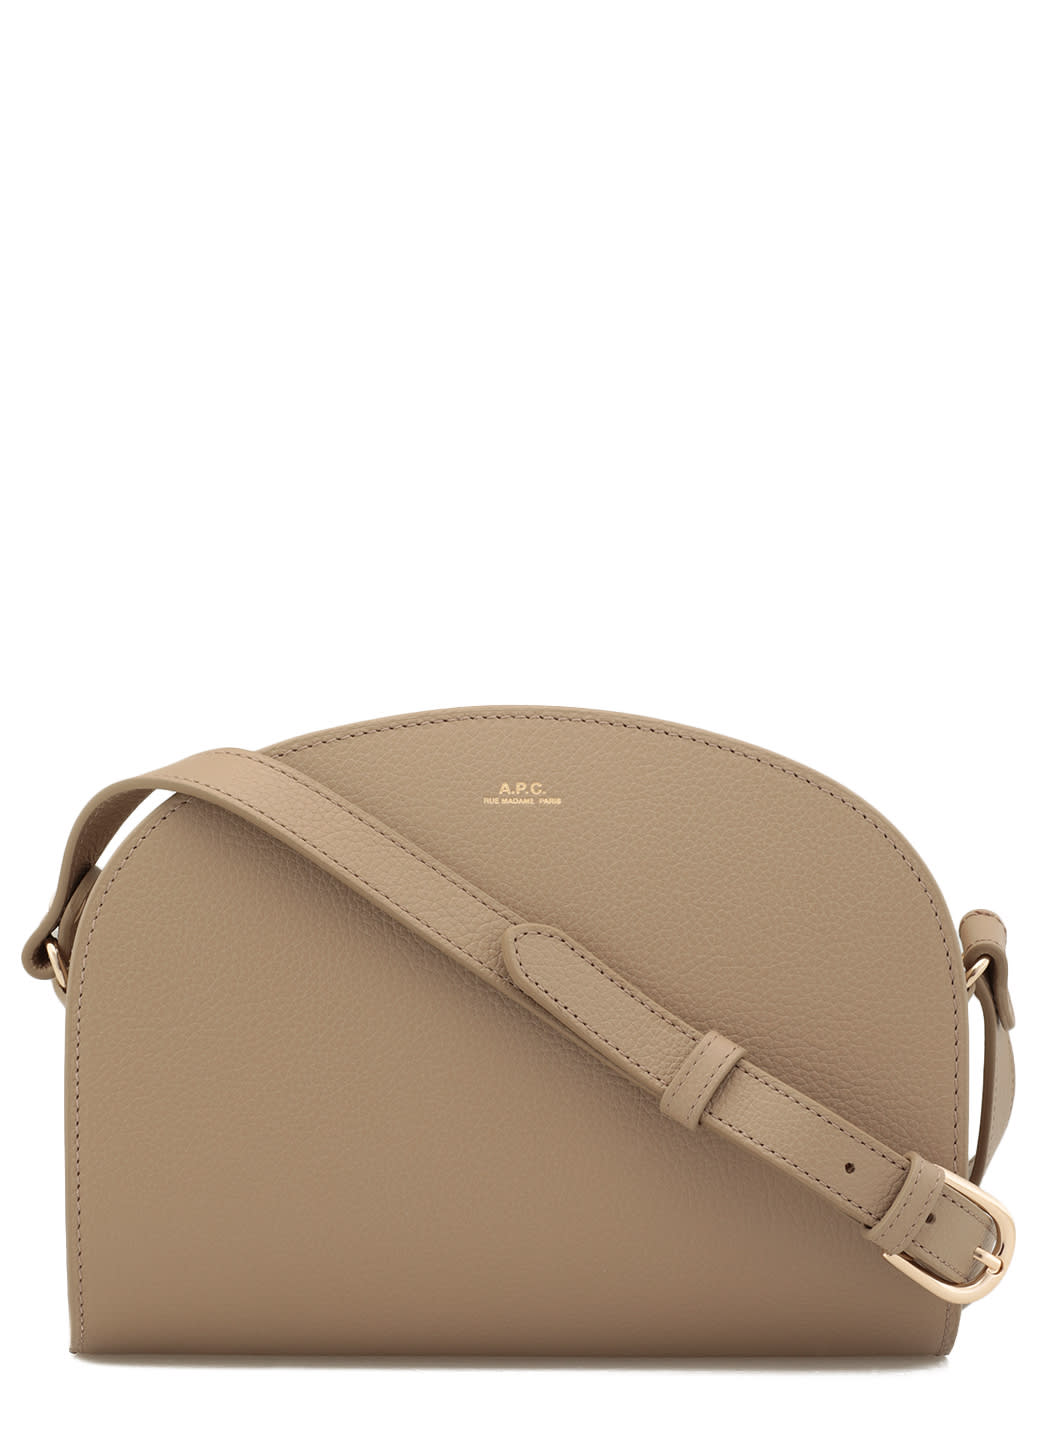 A.p.c. Pebbled Leather Shoulder Bag In Taupe